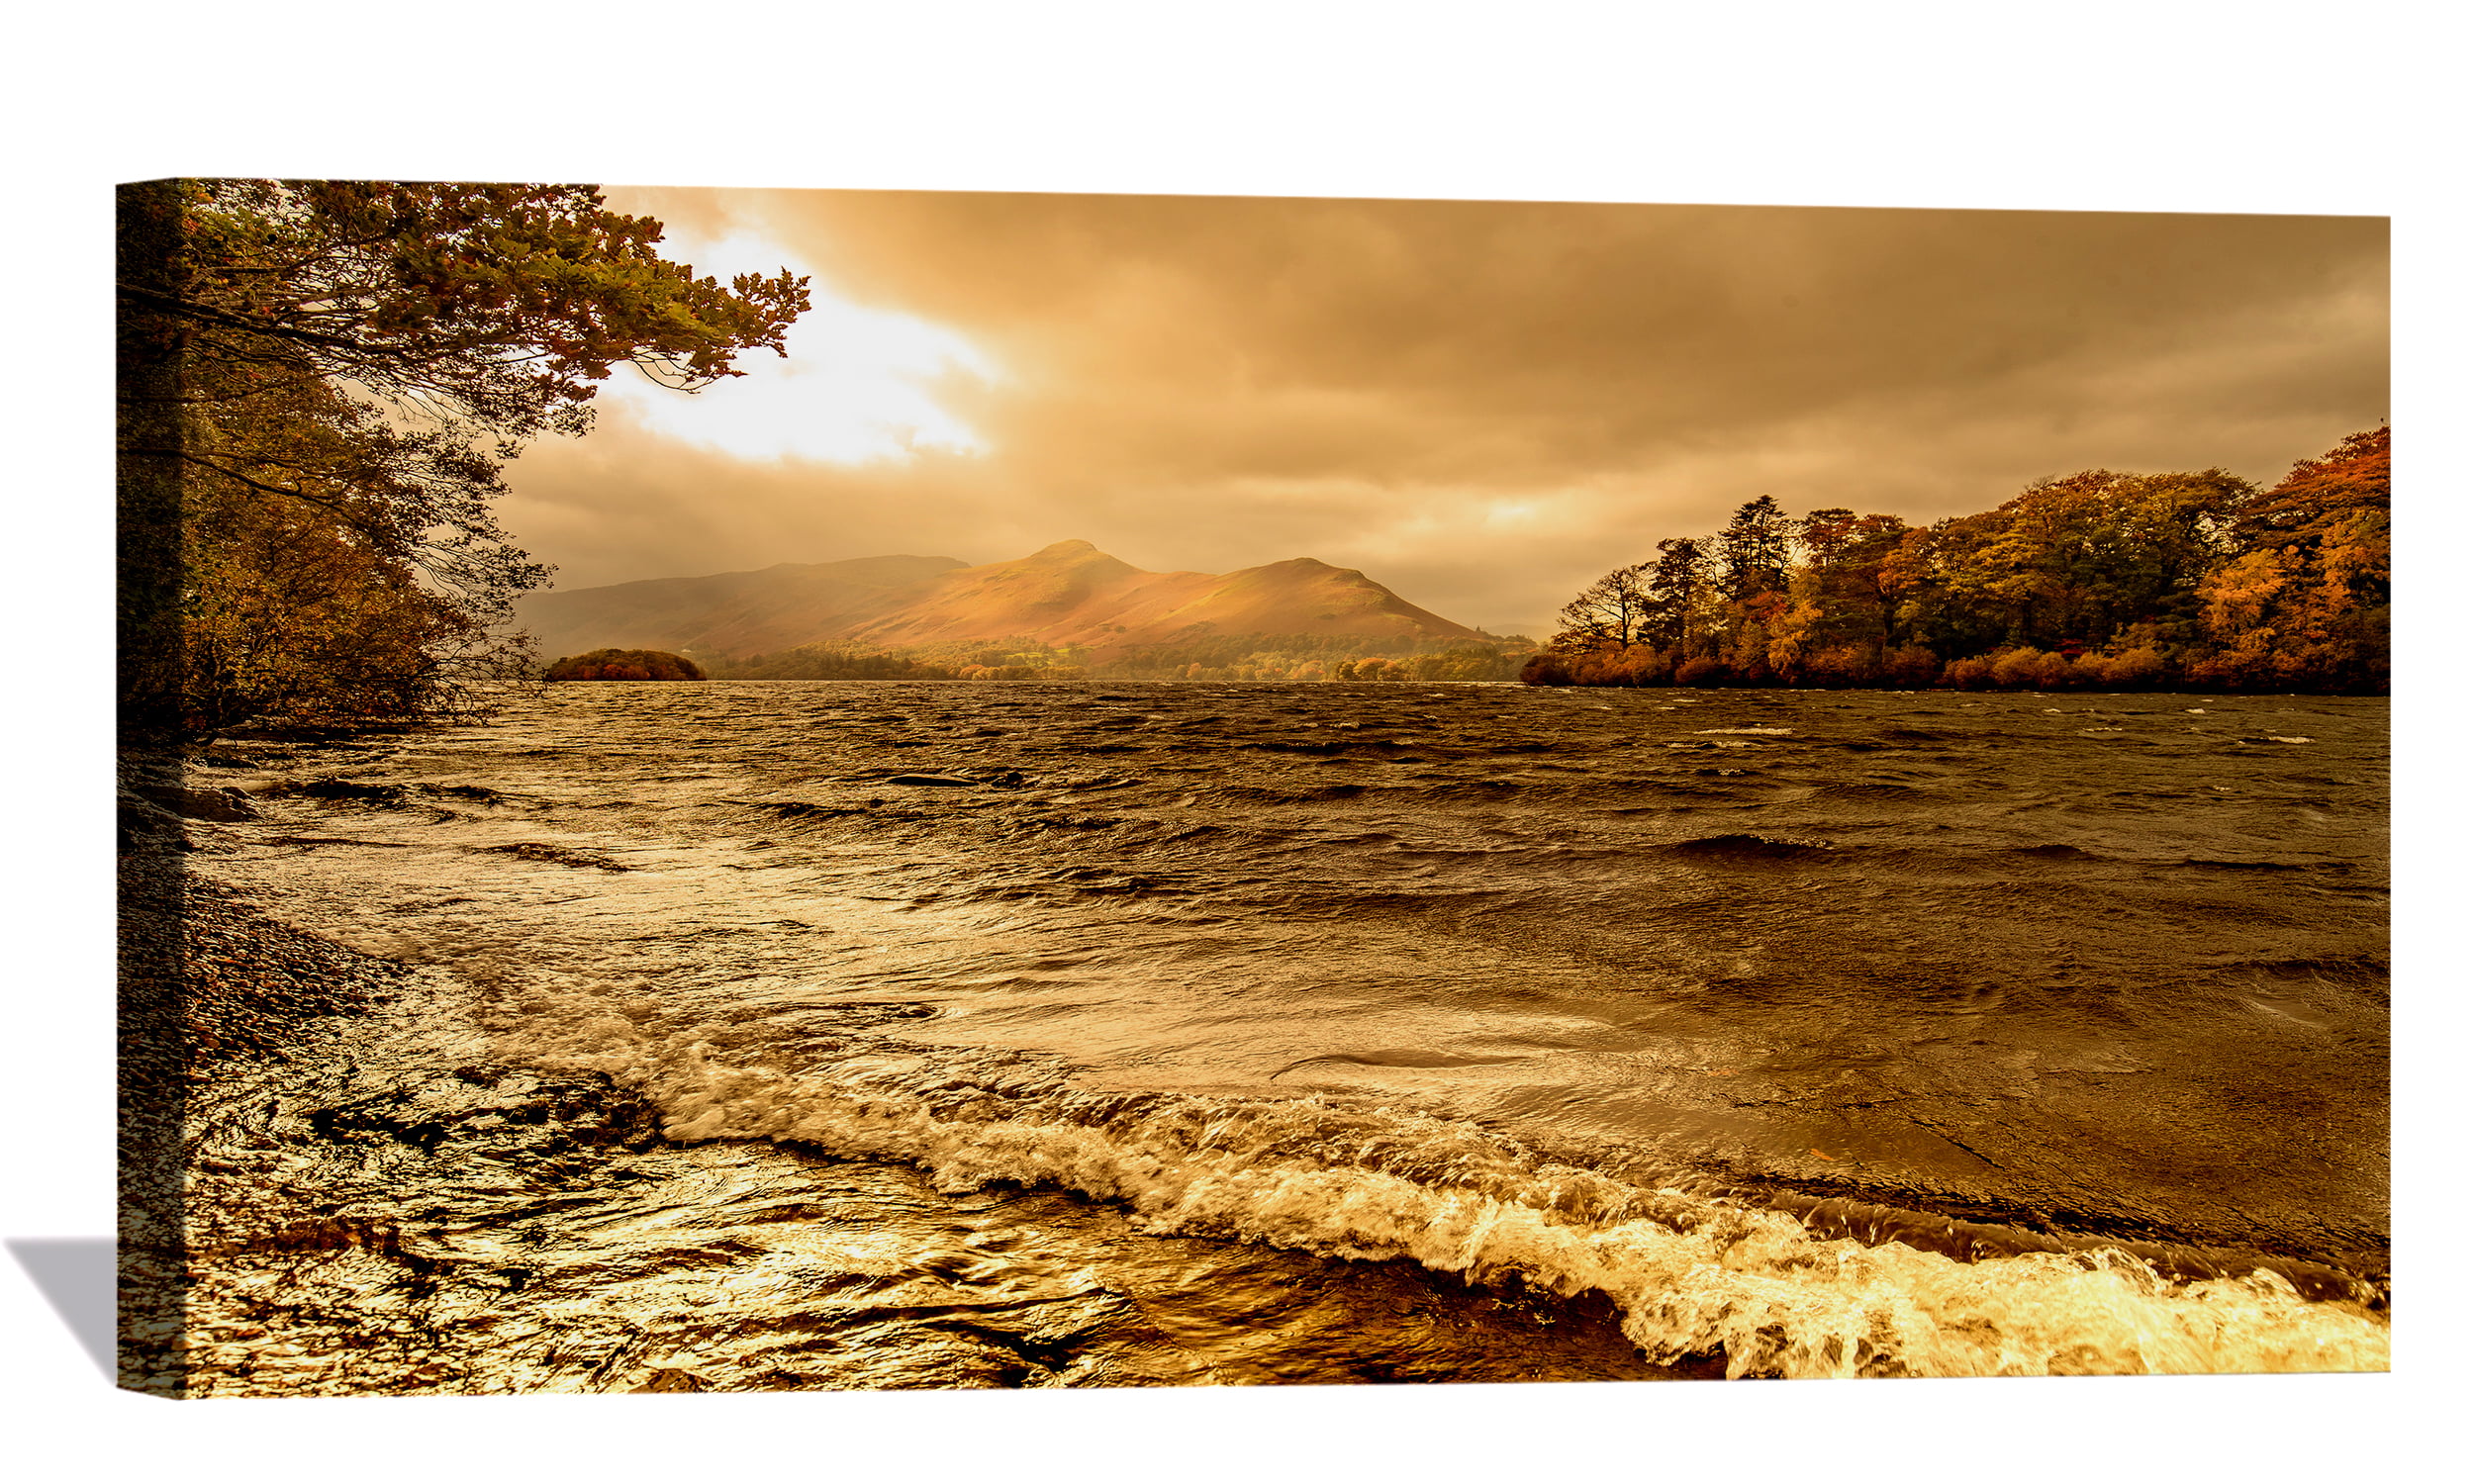 Sunrise Lake Mountains Forests Sky Waterfall Landscape Nature Poster 24"x13" 035 